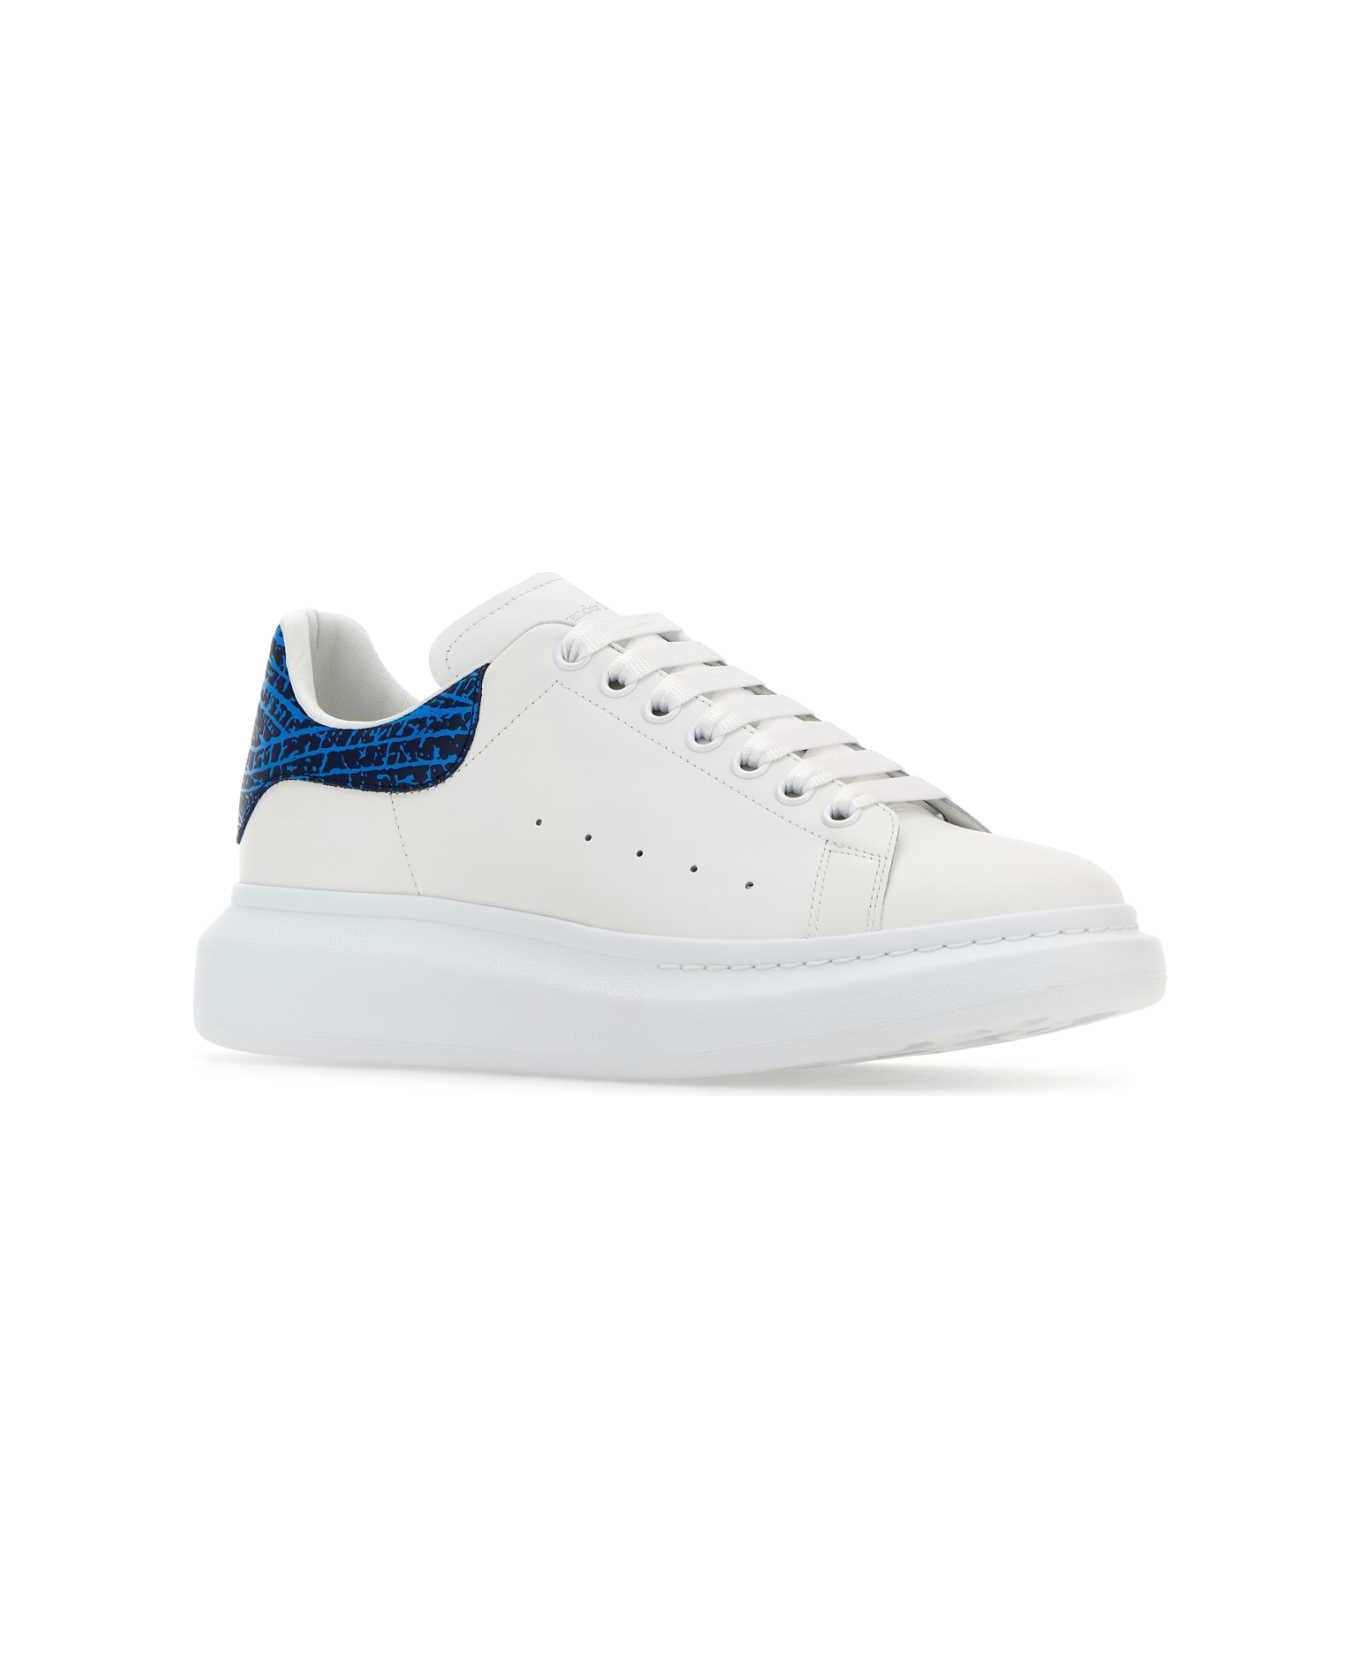 Alexander McQueen Sneakers With Printed Leather Heel - WHITELAPISBLUE